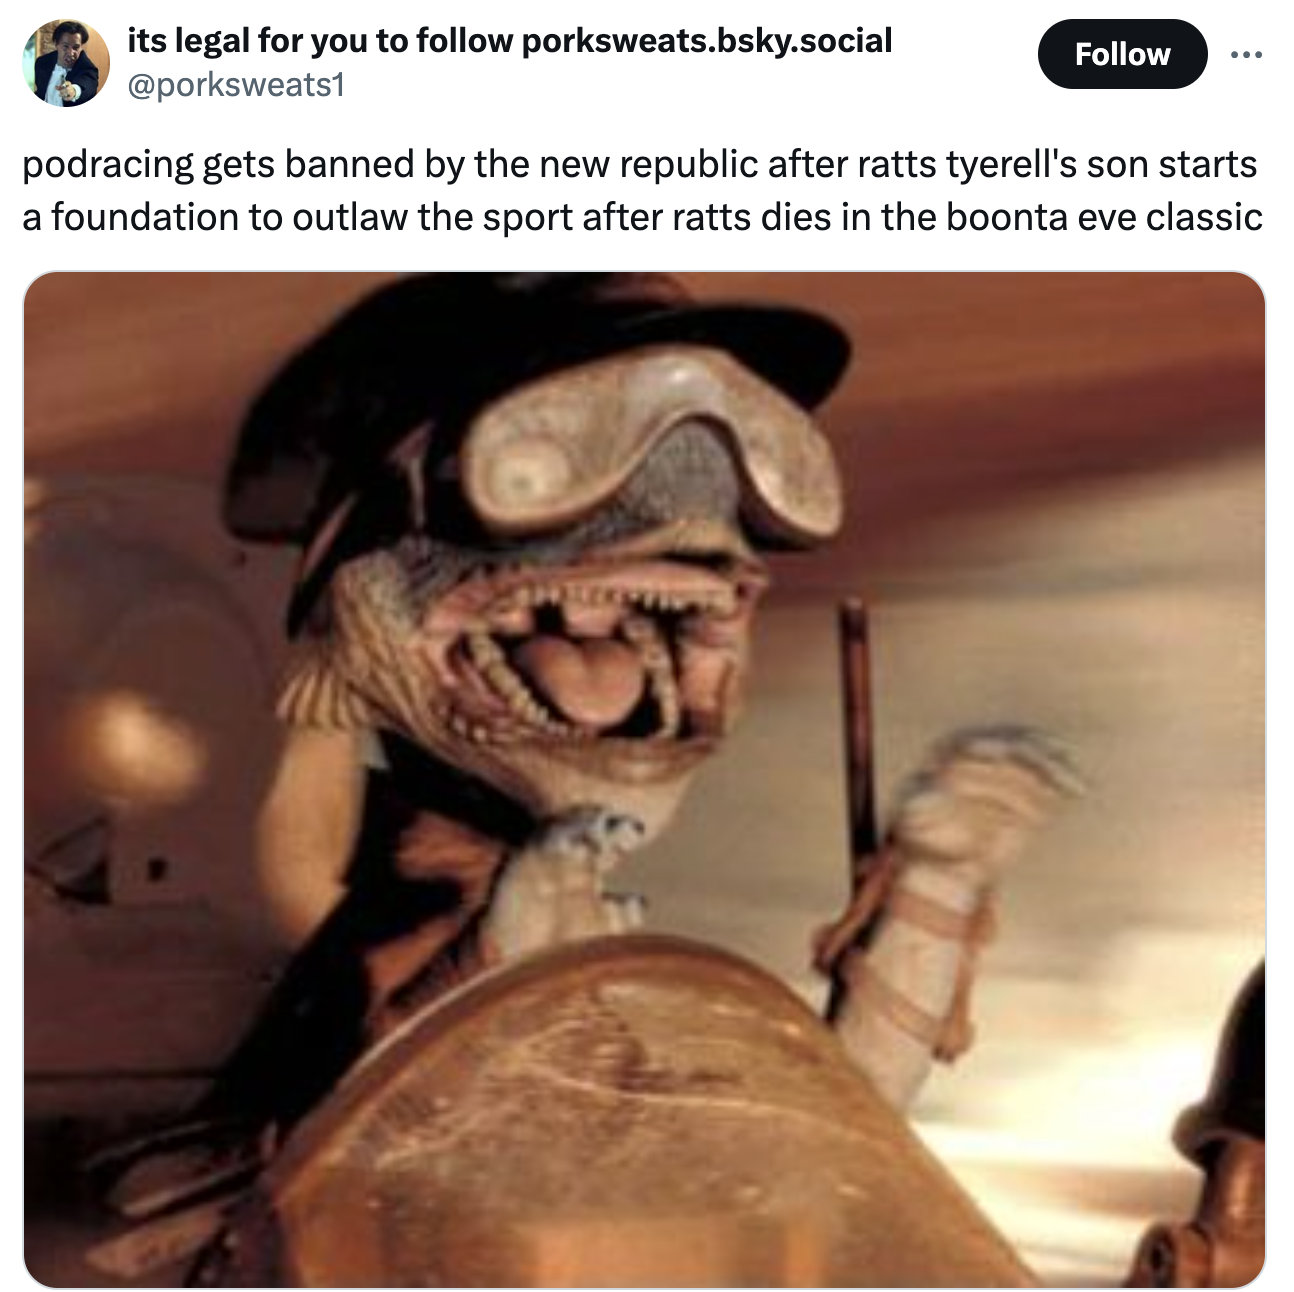 podracing meme - its legal for you to porksweats.bsky.social podracing gets banned by the new republic after ratts tyerell's son starts a foundation to outlaw the sport after ratts dies in the boonta eve classic